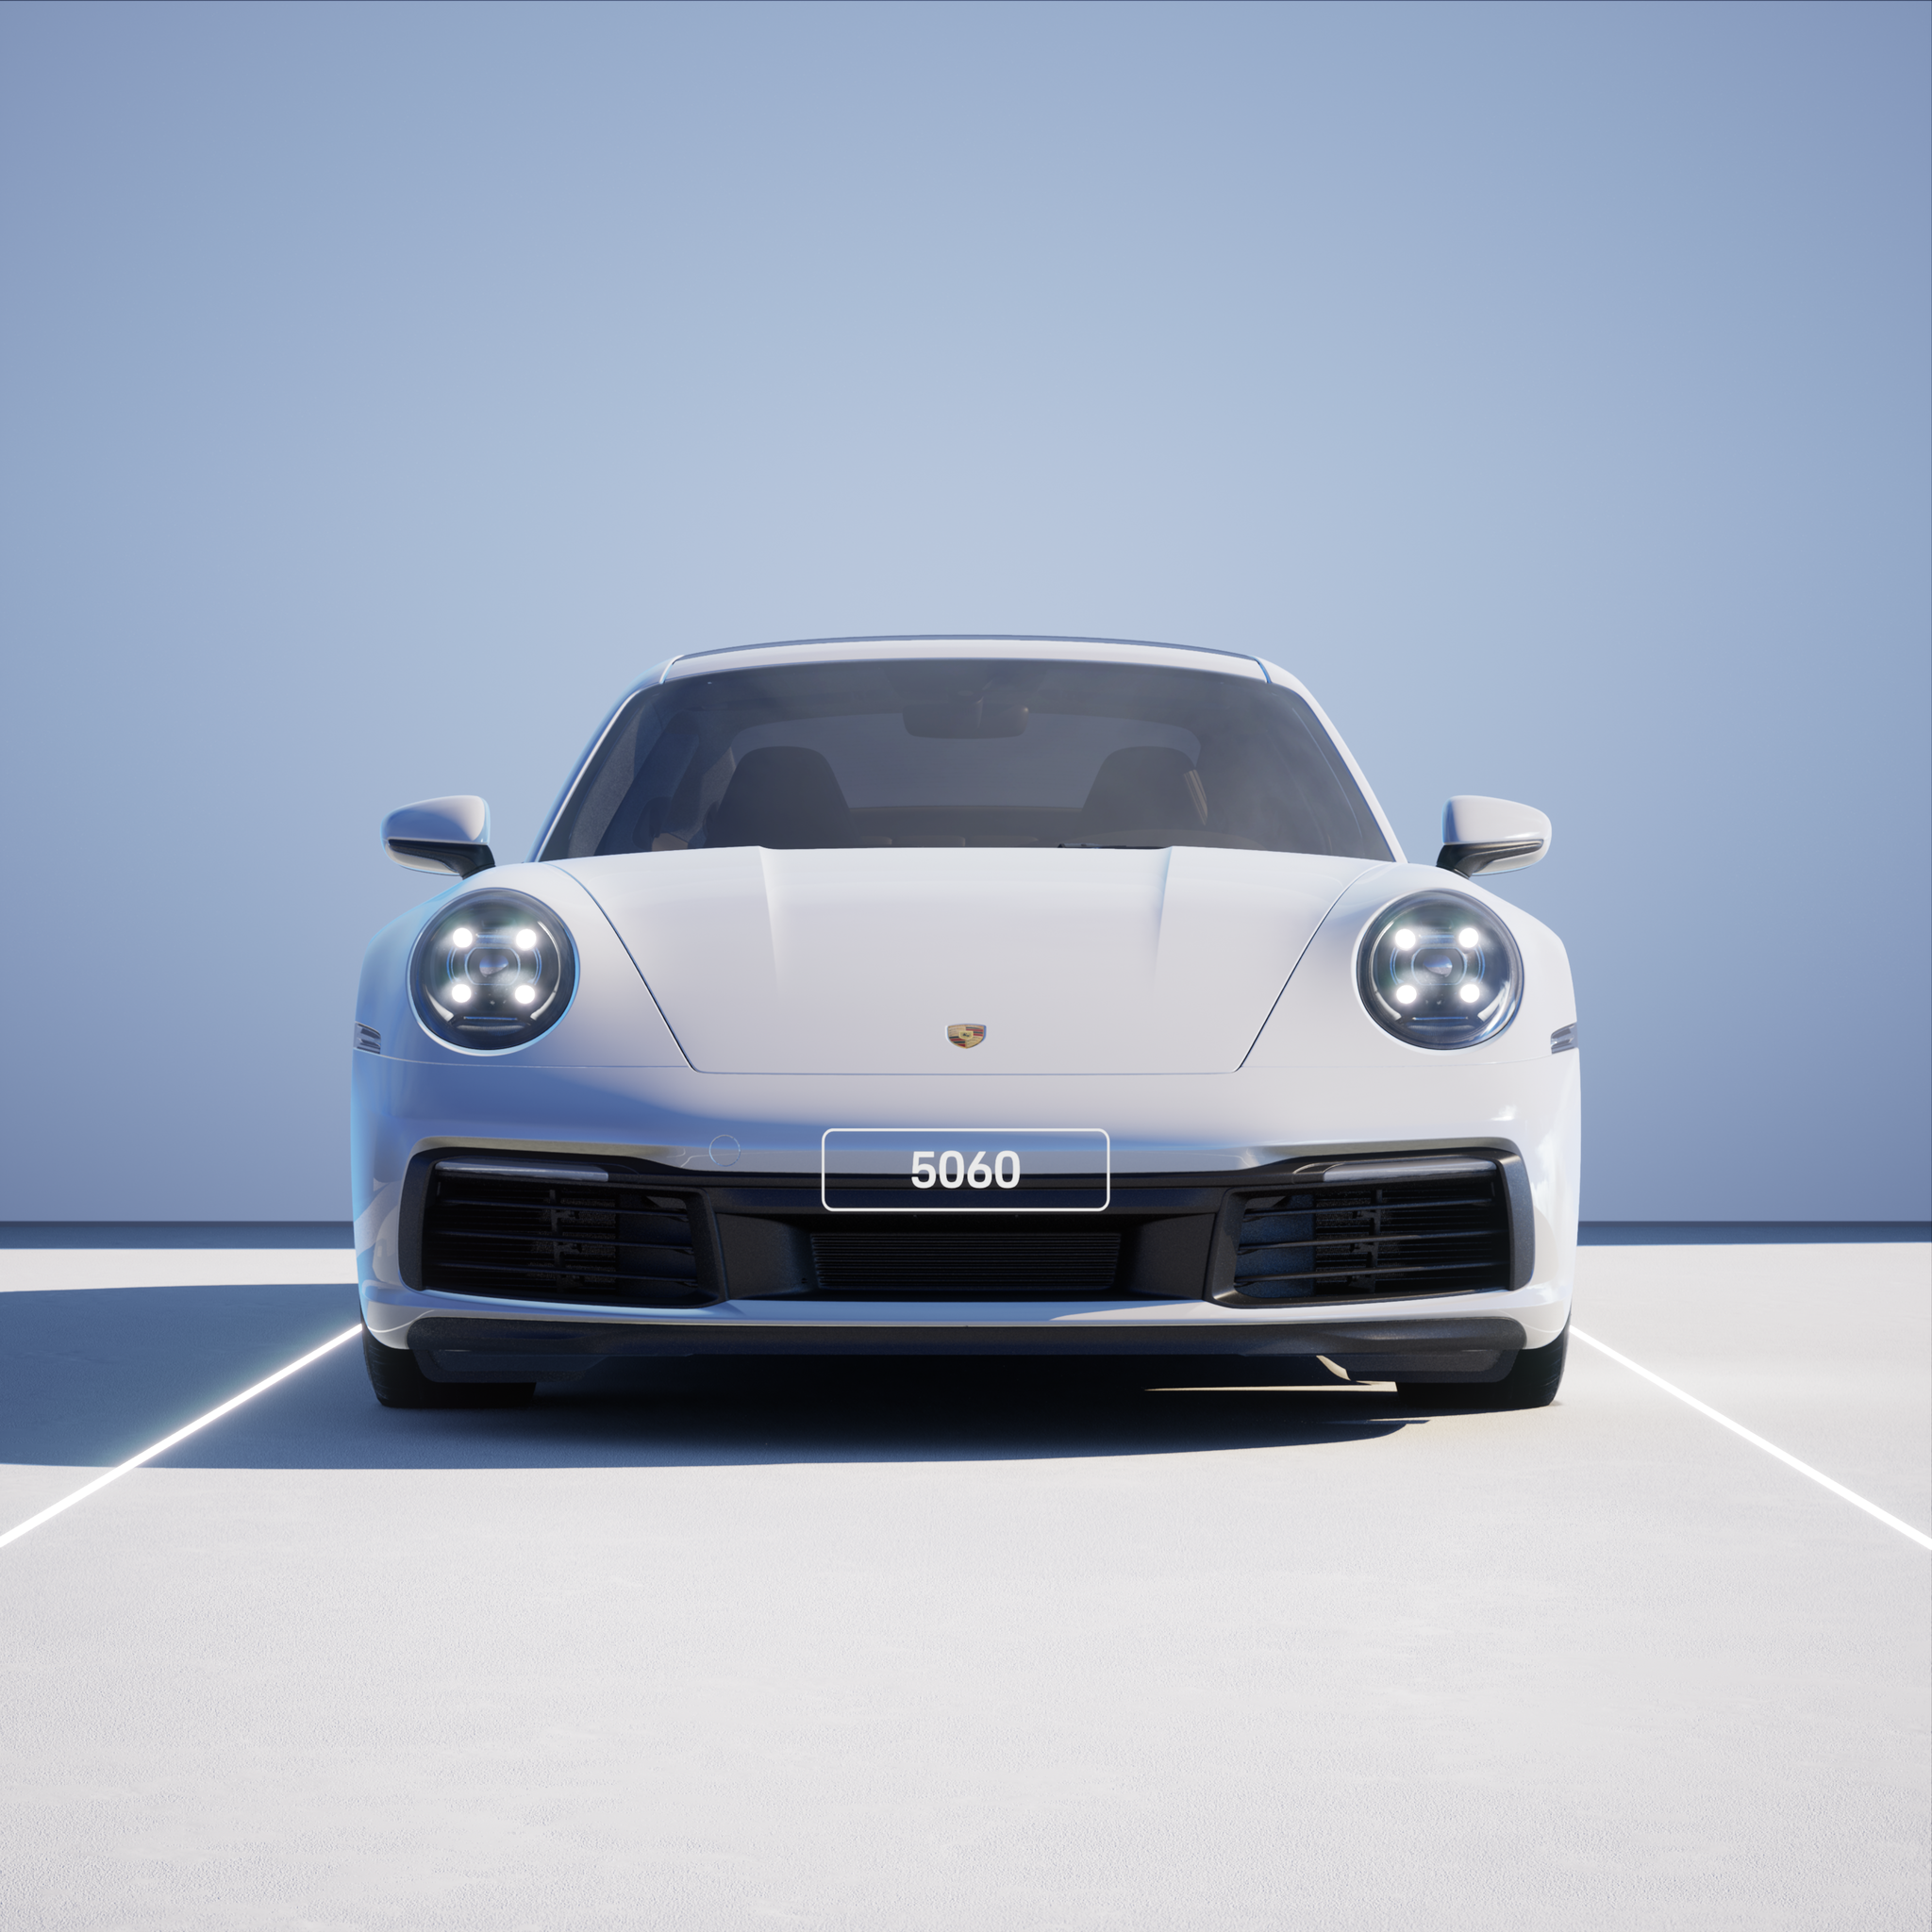 The PORSCHΞ 911 5060 image in phase